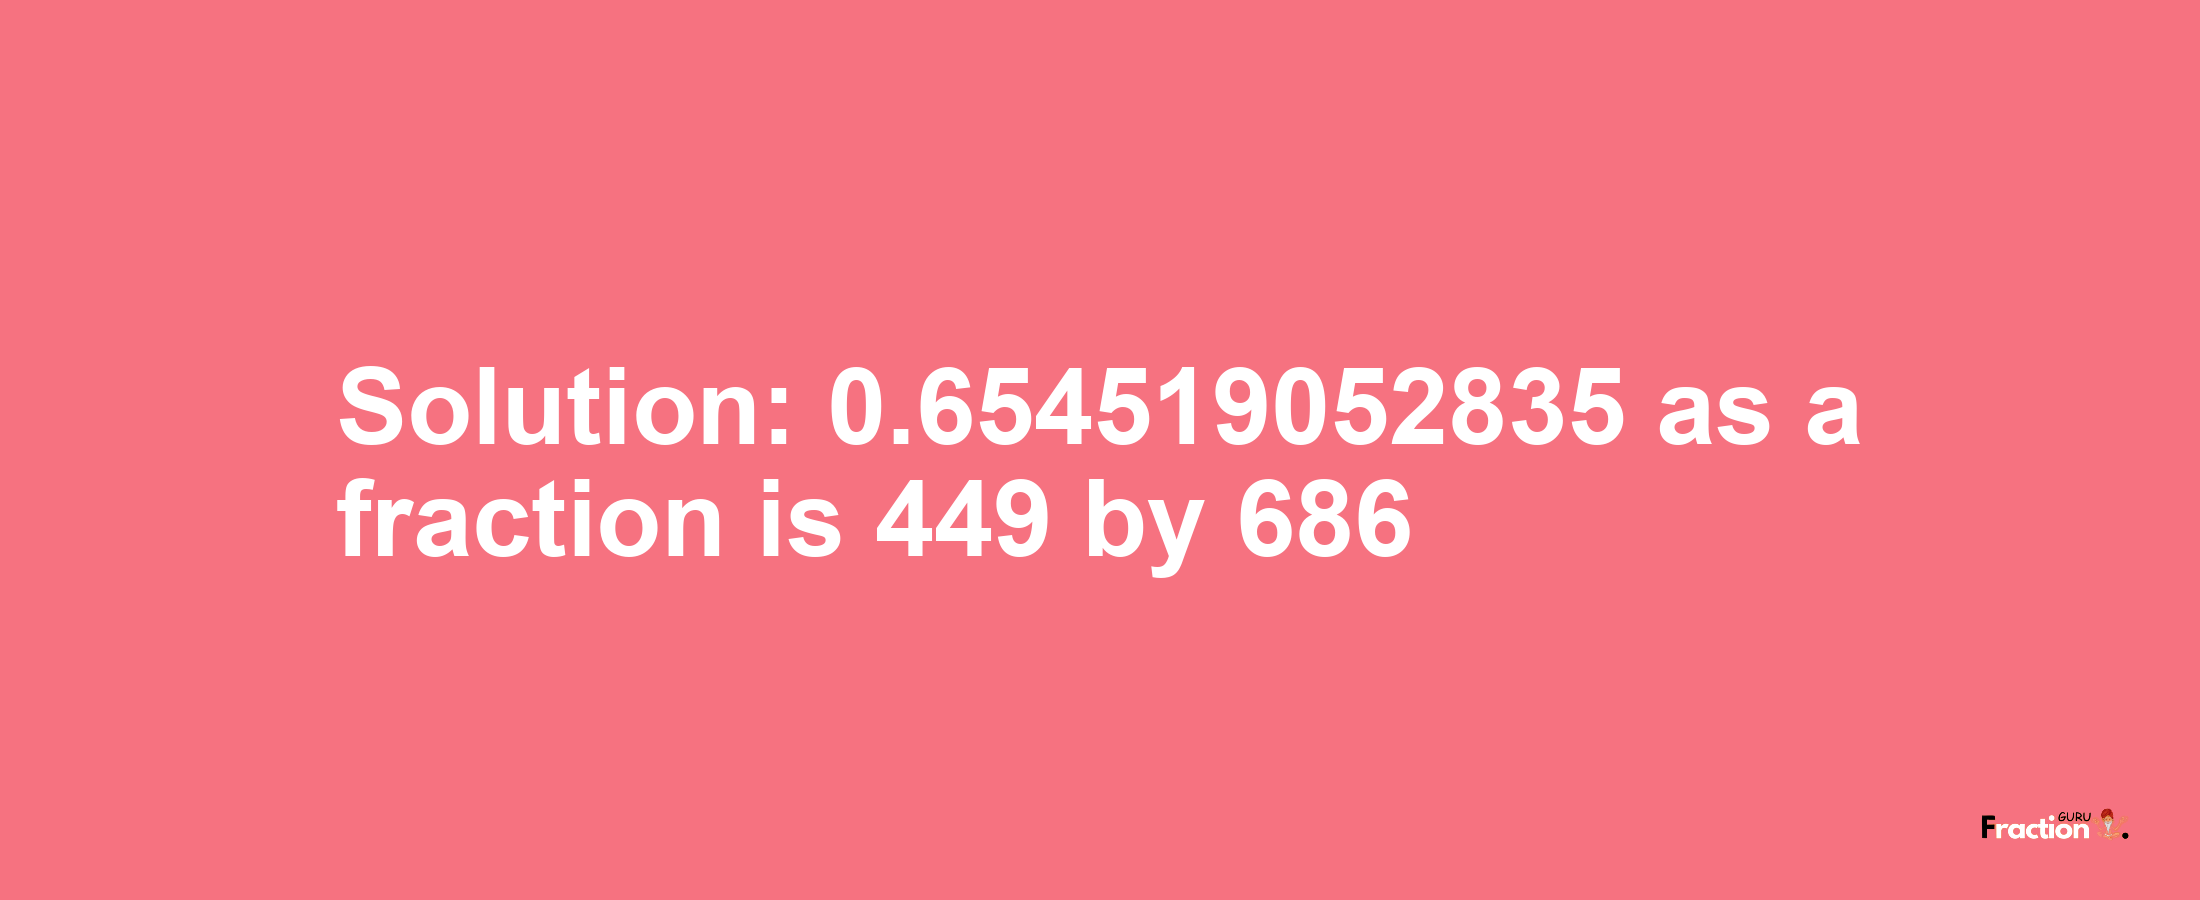 Solution:0.654519052835 as a fraction is 449/686